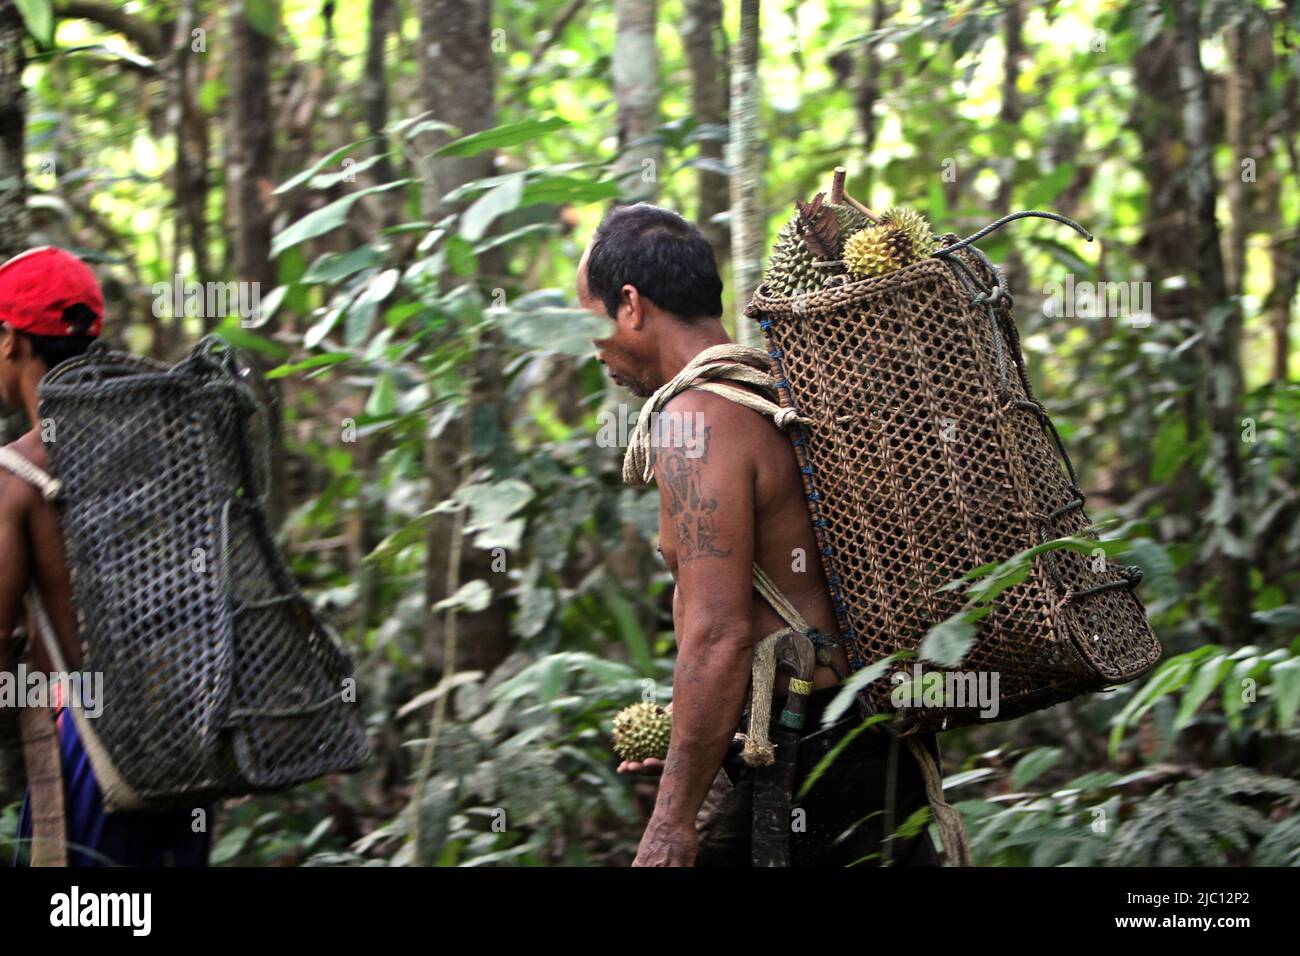 A man carrying a rattan bag loaded with freshly harvested durian fruits as he is walking with a relative in the forest in Sungai Utik, Batu Lintang, Embaloh Hulu, Kapuas Hulu, West Kalimantan, Indonesia. Stock Photo